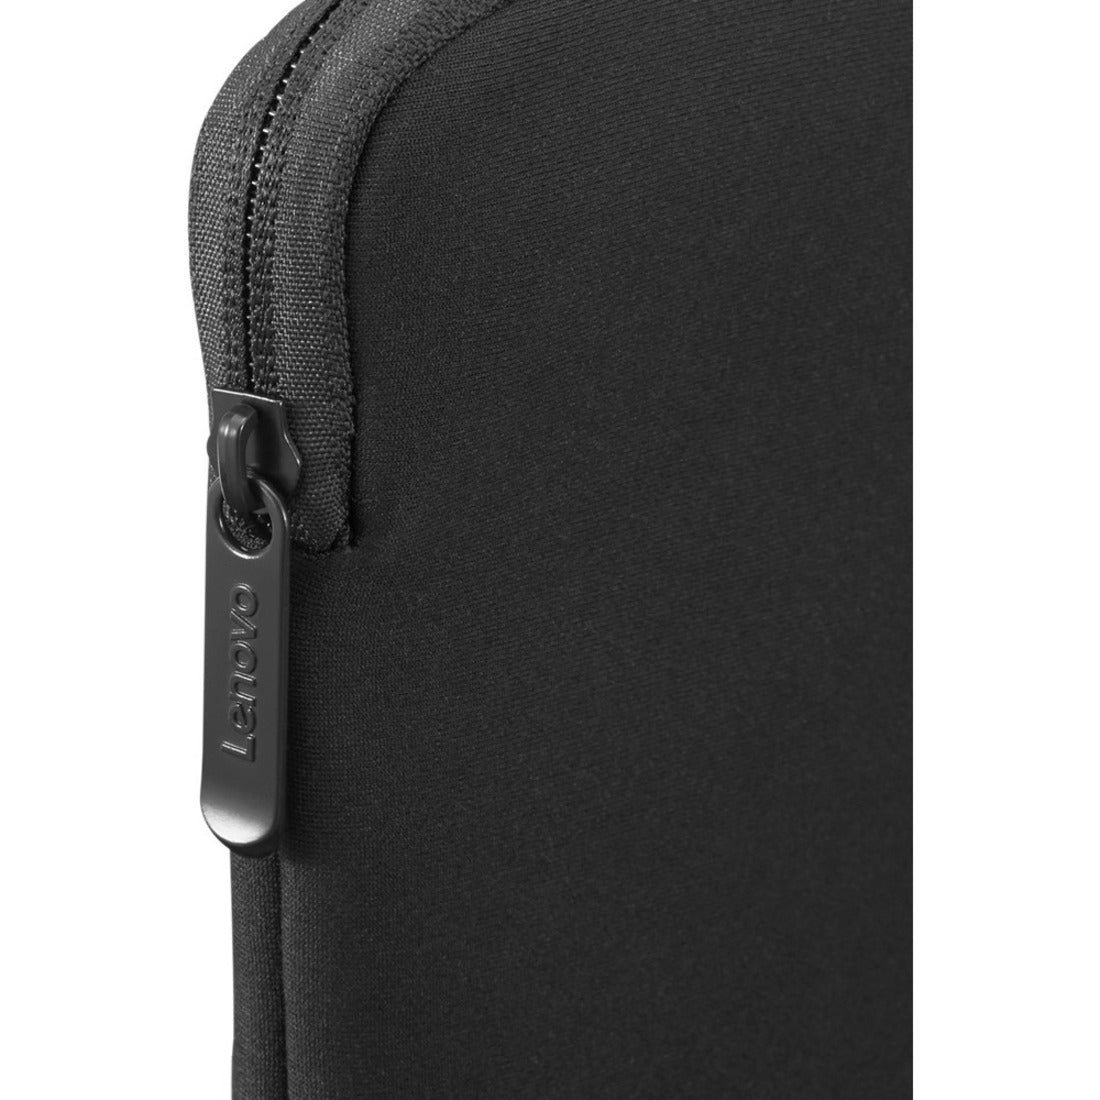 Lenovo Carrying Case (Sleeve) for 13" to 14" Notebook - Black